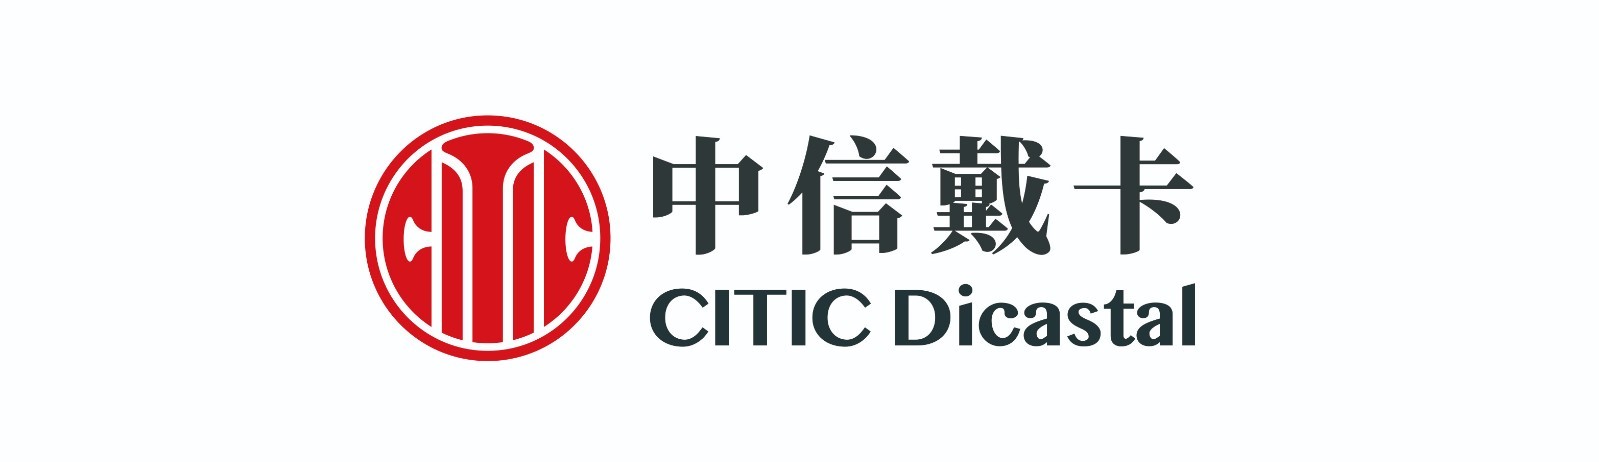 CITIC Dicastal joins ASI as the new Production and Transformation member